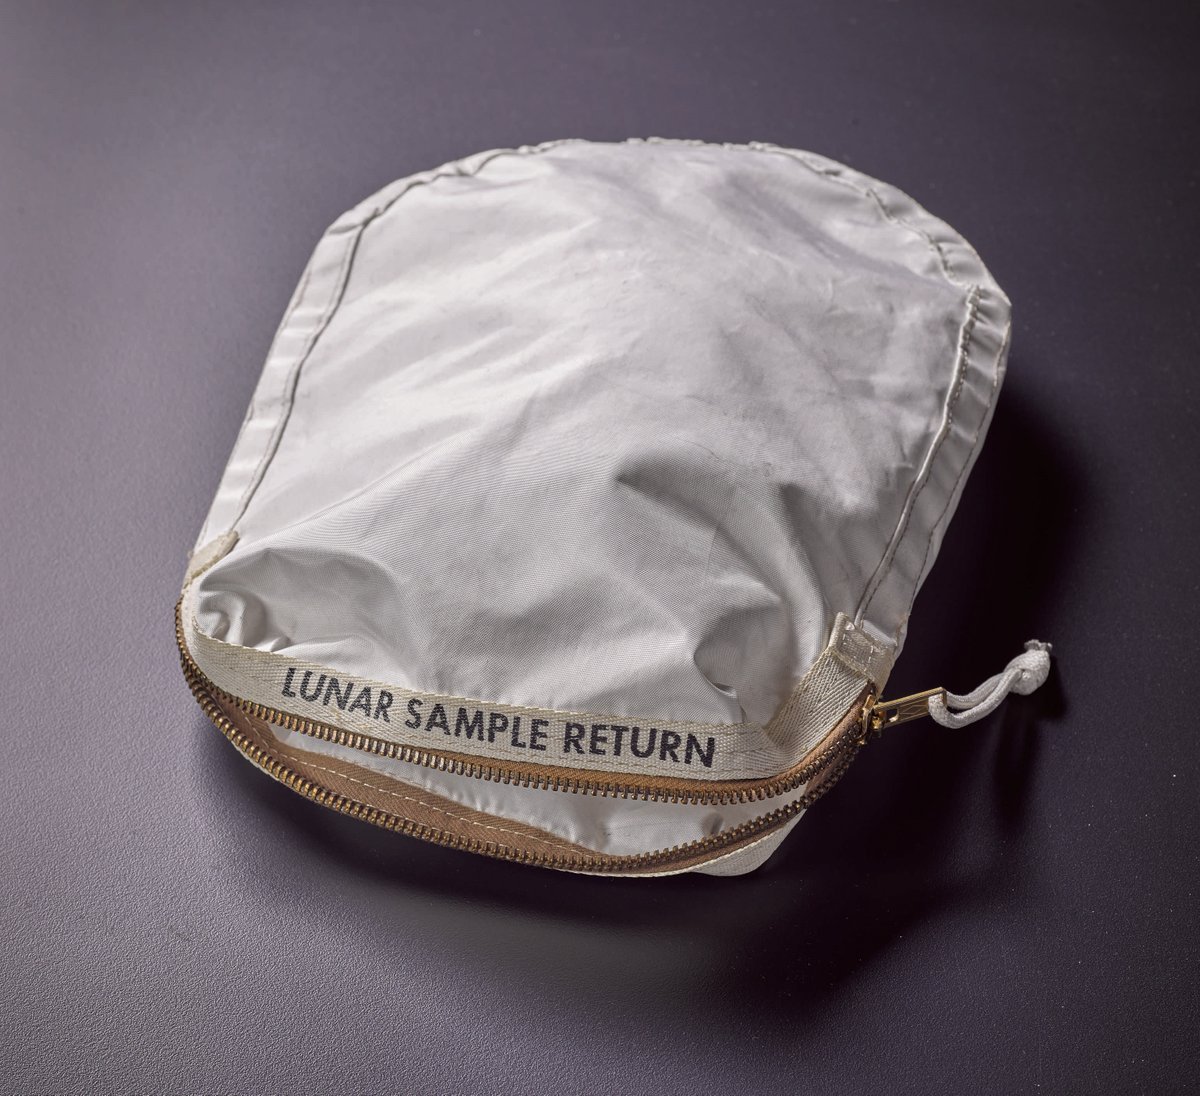 Bag of Neil Armstrong with the lunar dust, sold at auction for $ 1.8 million